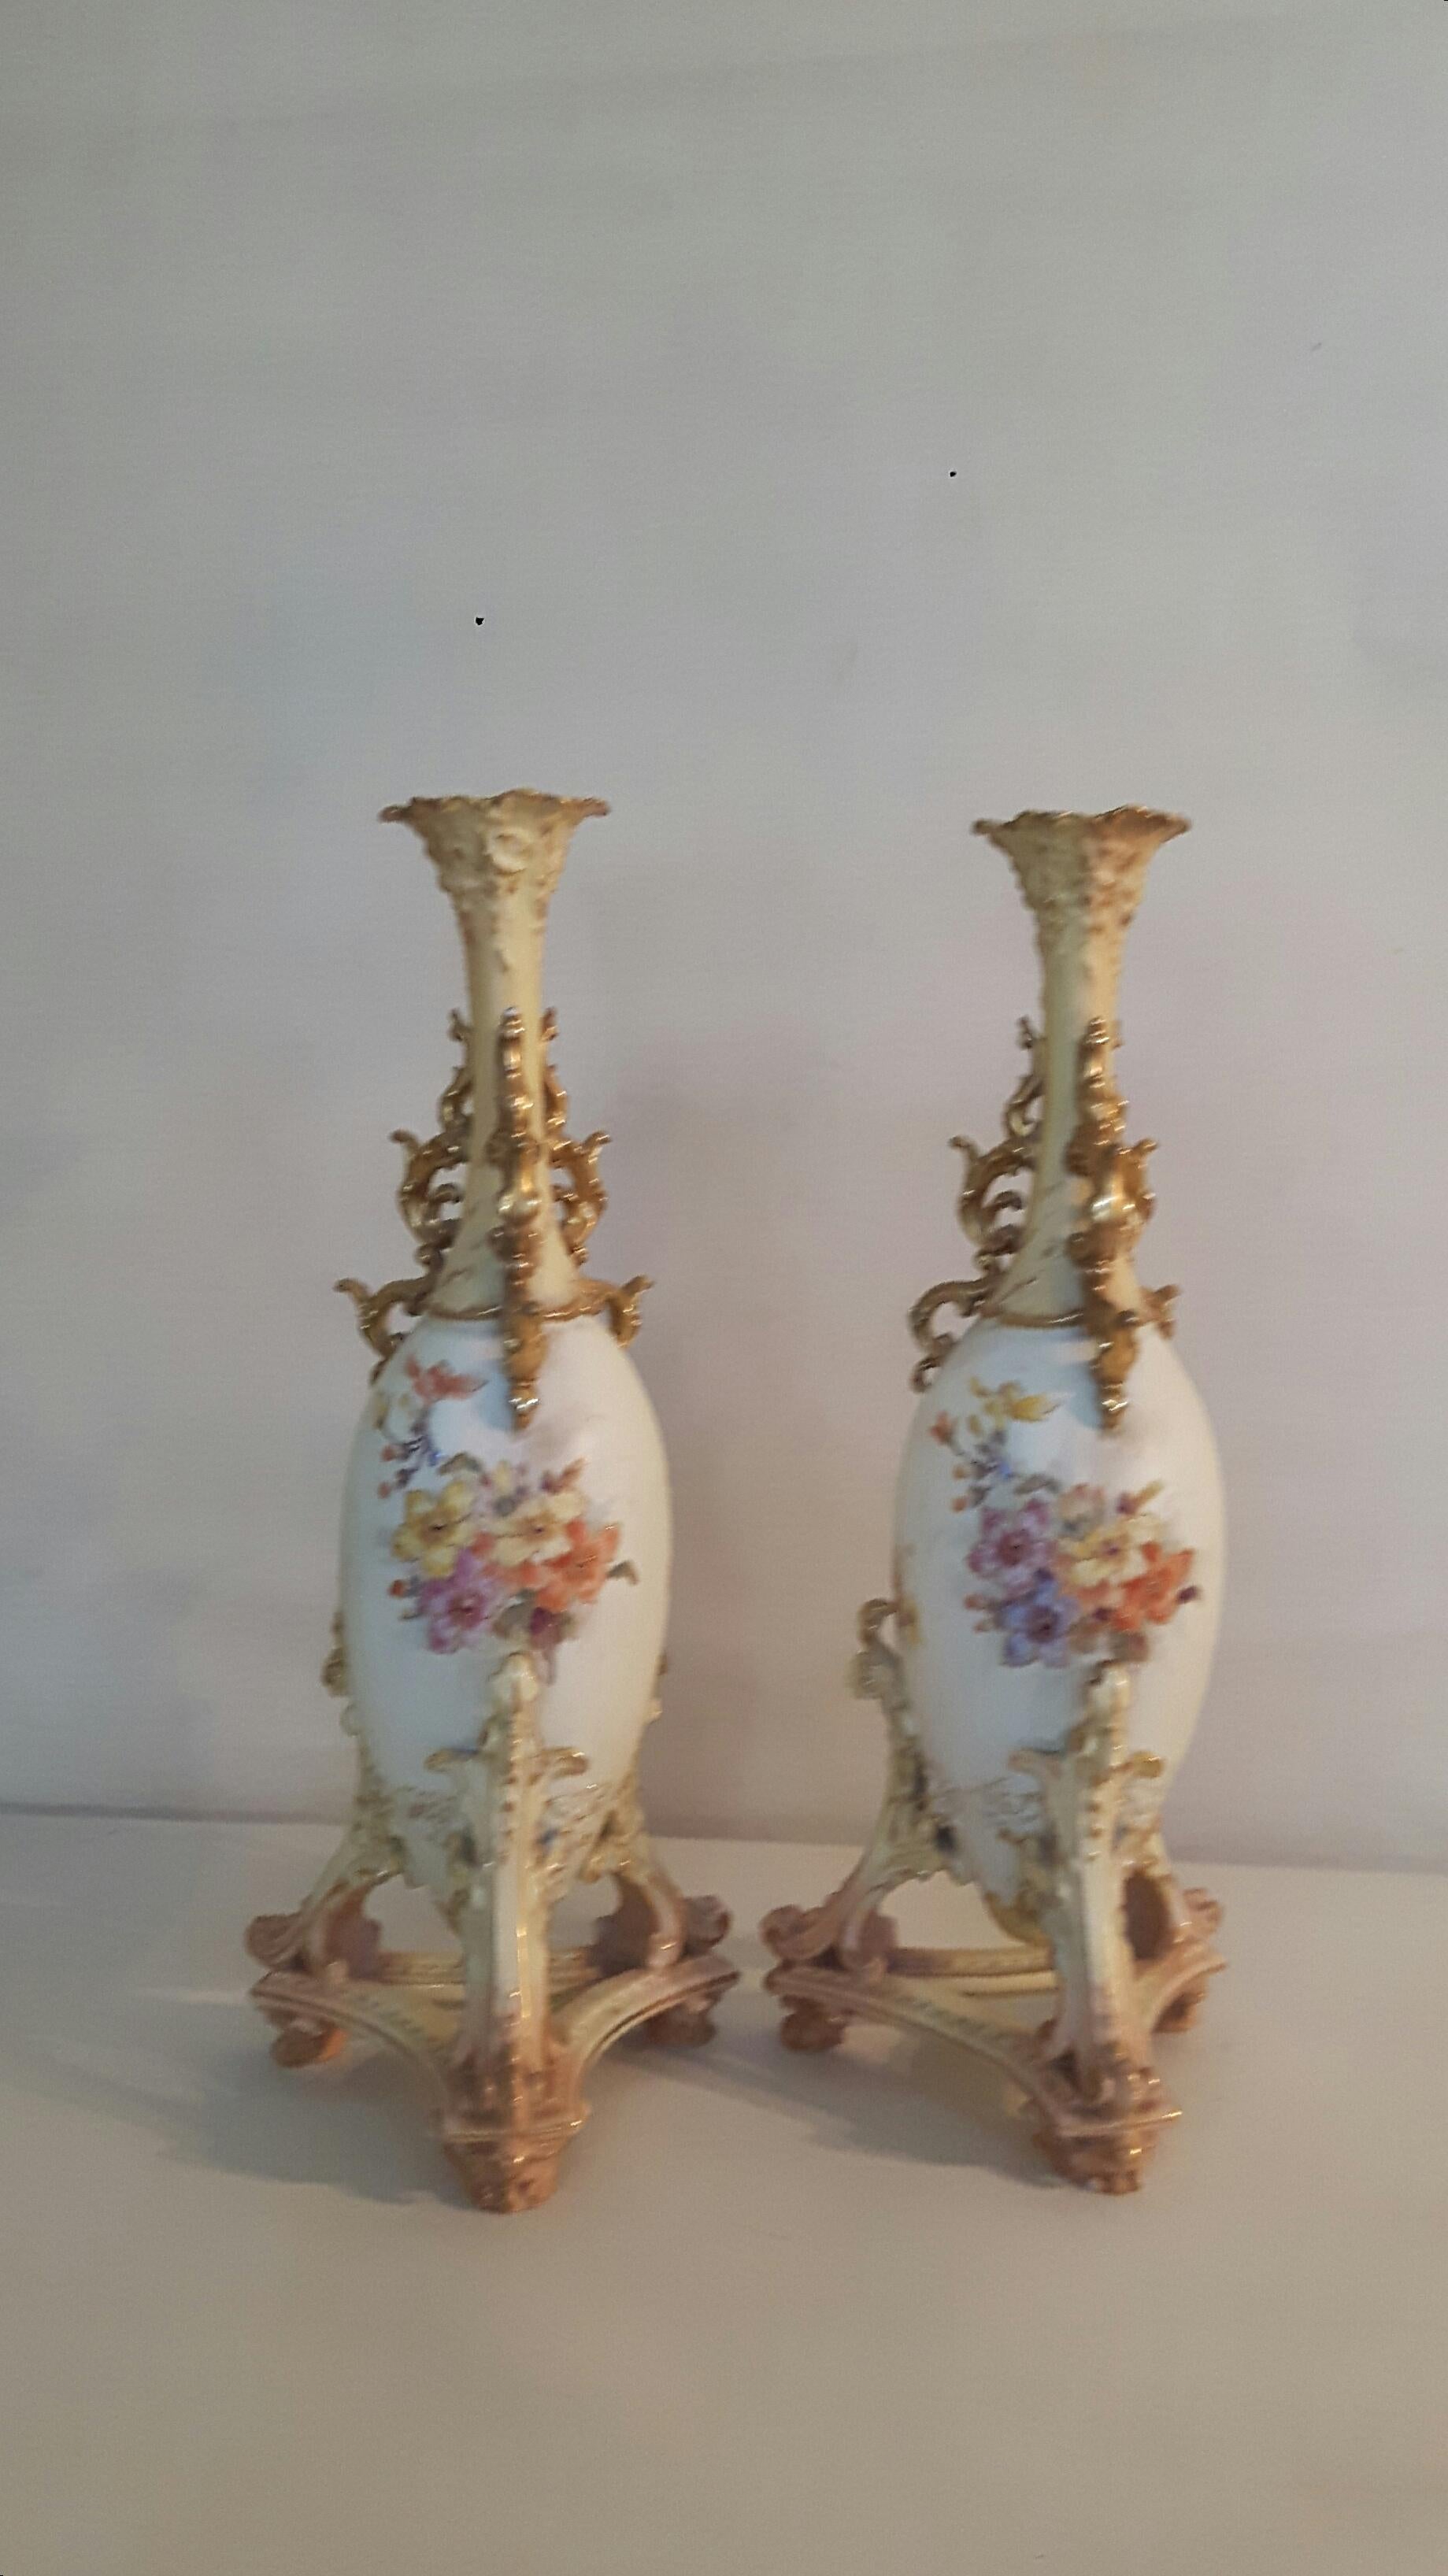 Neoclassical Pair of Early 20th Century Rudolfstadt Vases For Sale